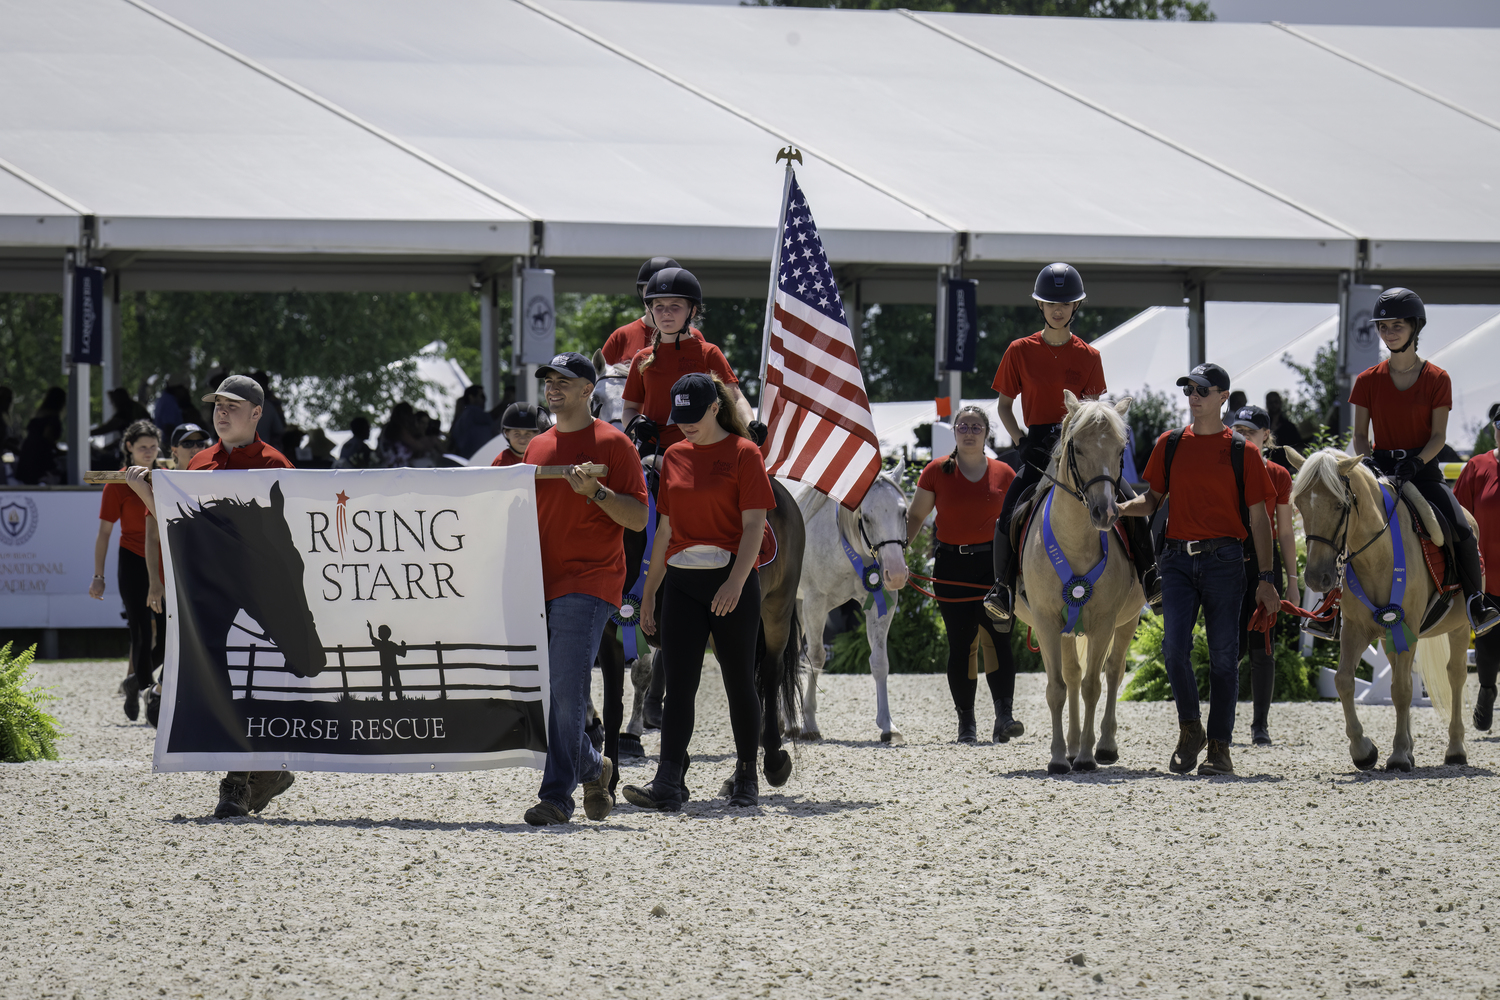 Rising Starr Horse Rescue was part of the Opening Day ceremonies. The Hampton Classic Horse Show is dedicated to supporting horse rescue and adoption organizations. MARIANNE BARNETT